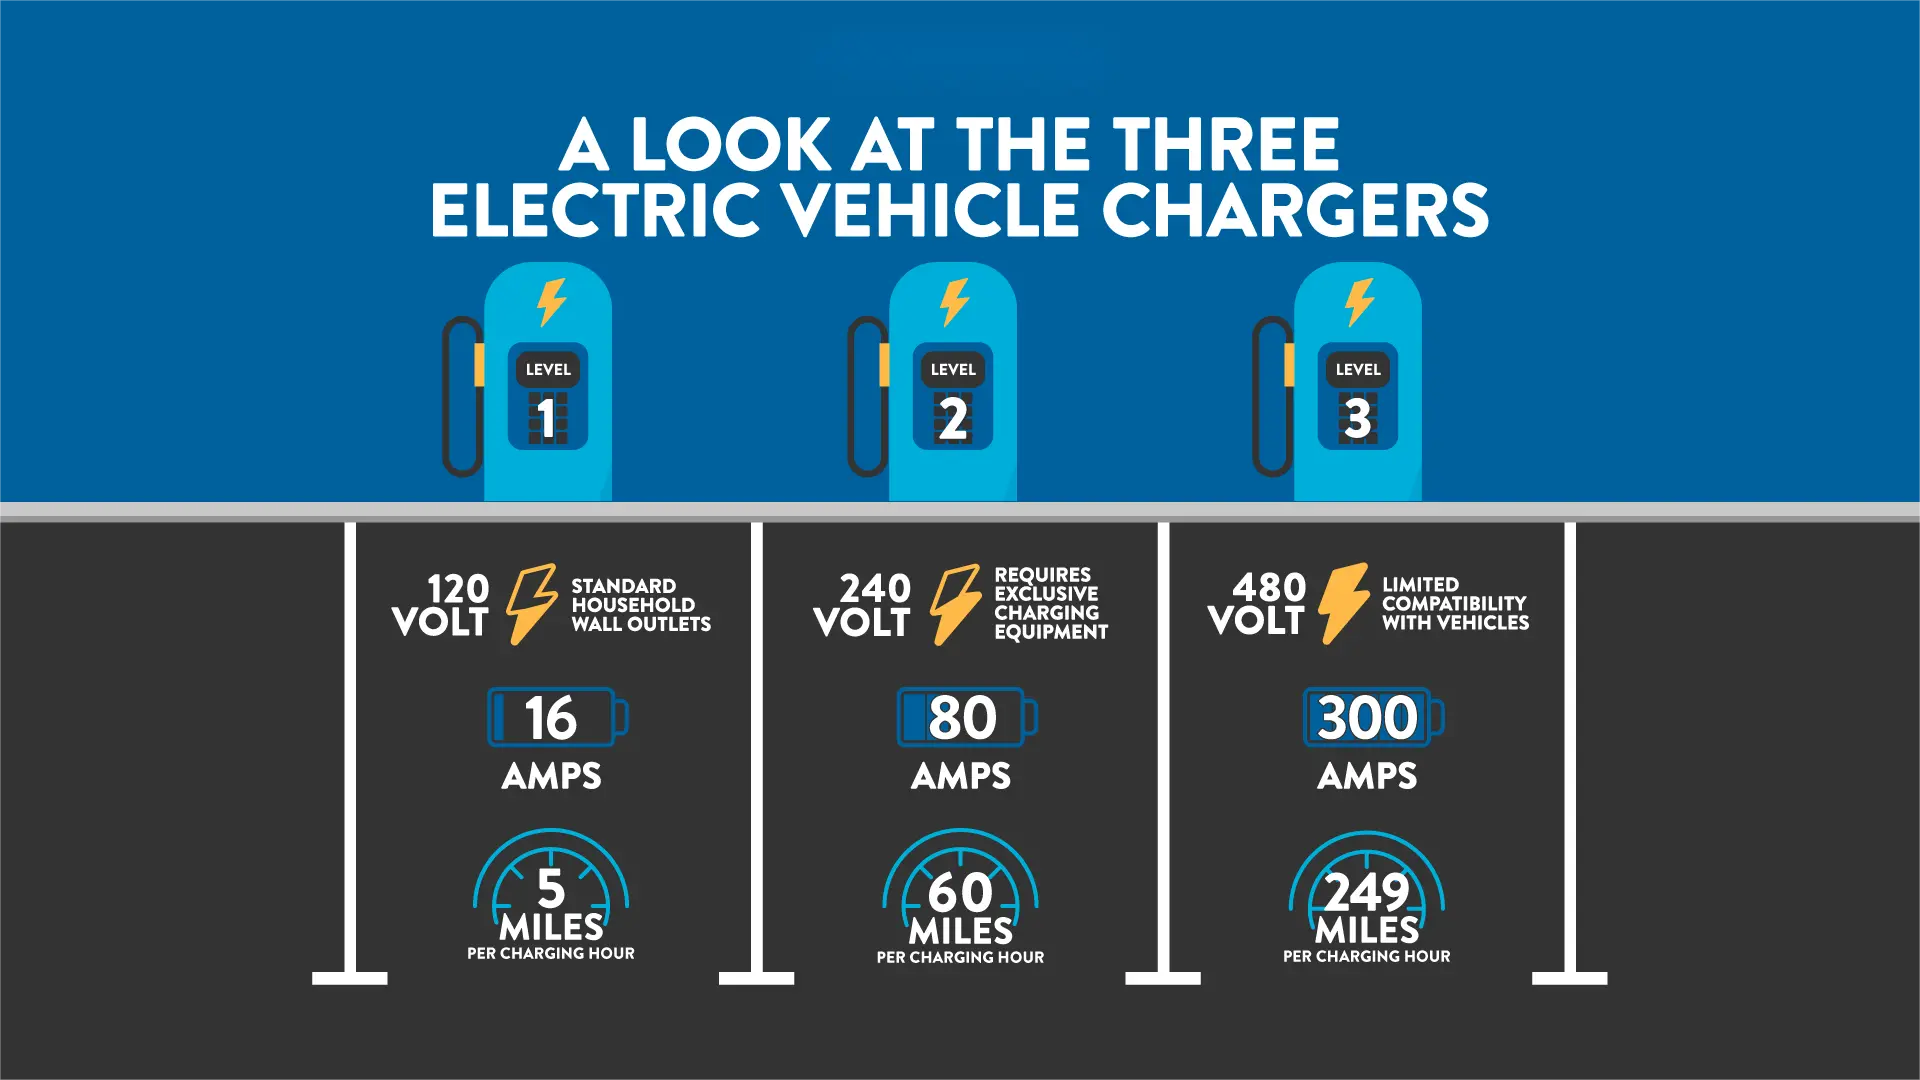 How Much Cost For EV Charging?